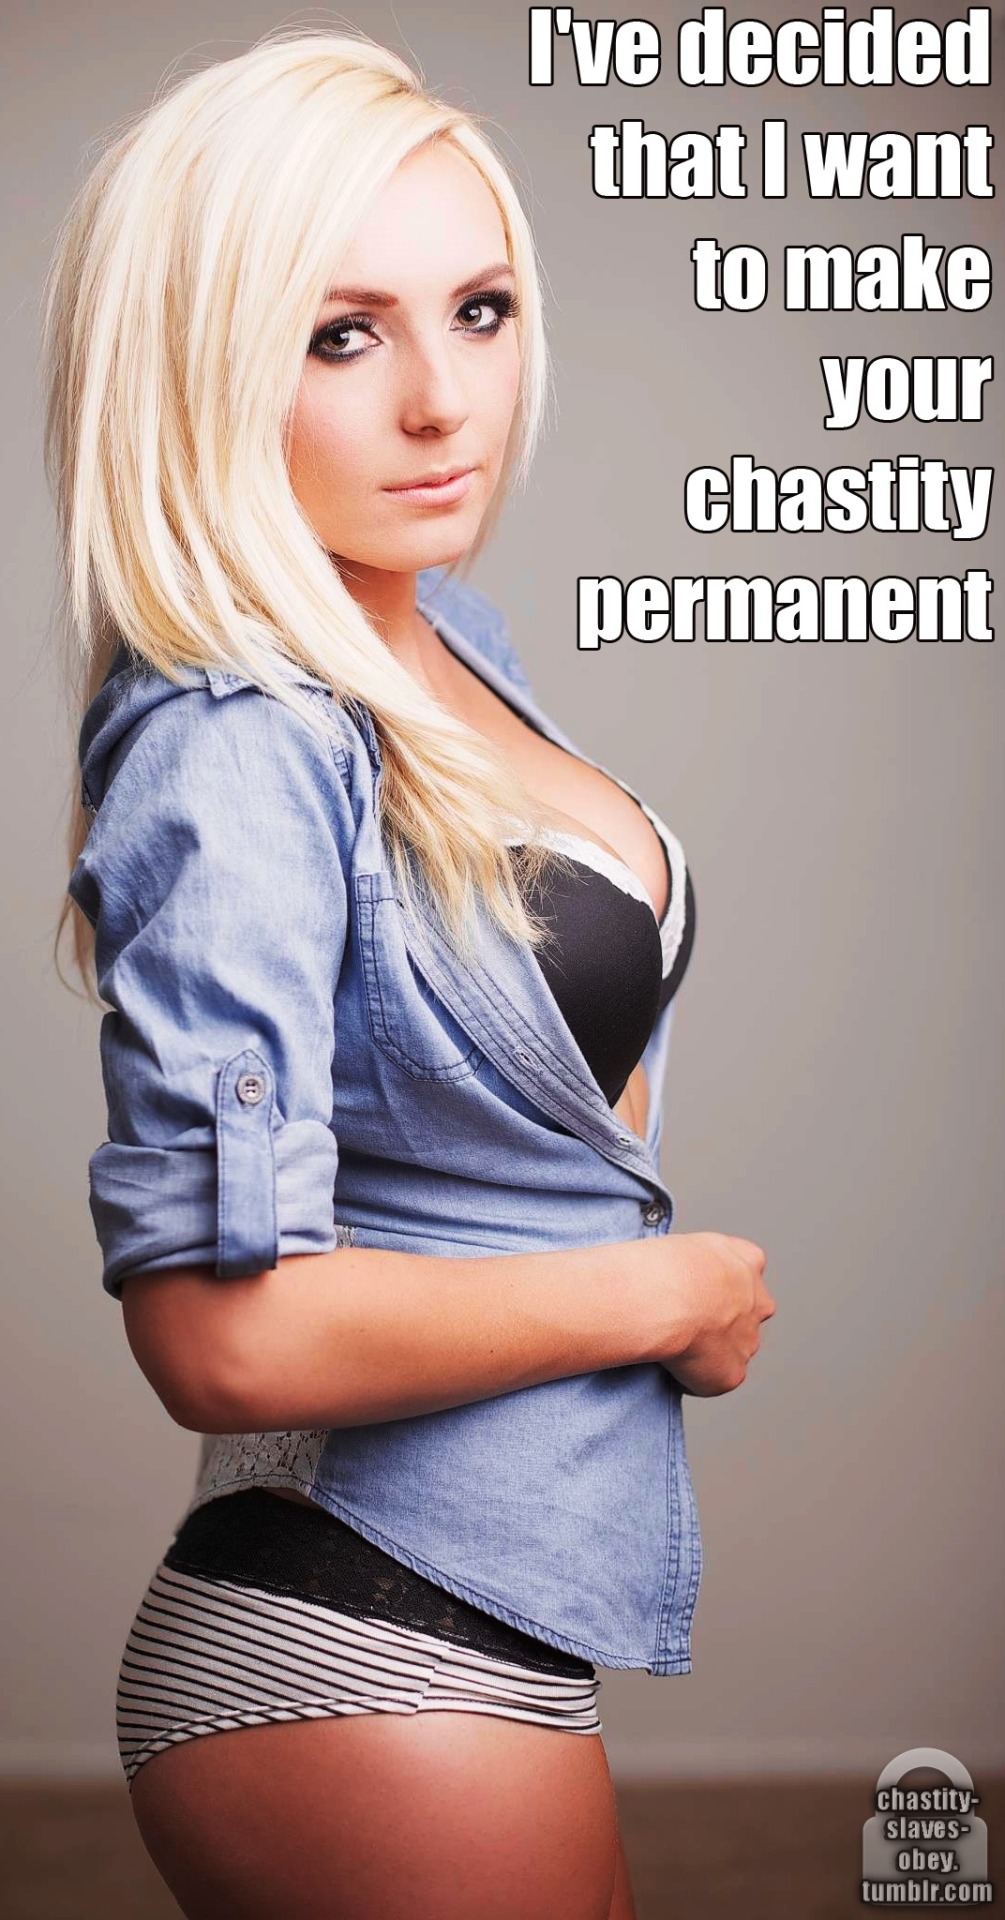  Love your stuff. I would love to see a Jessica Nigri permanent chastity one.  